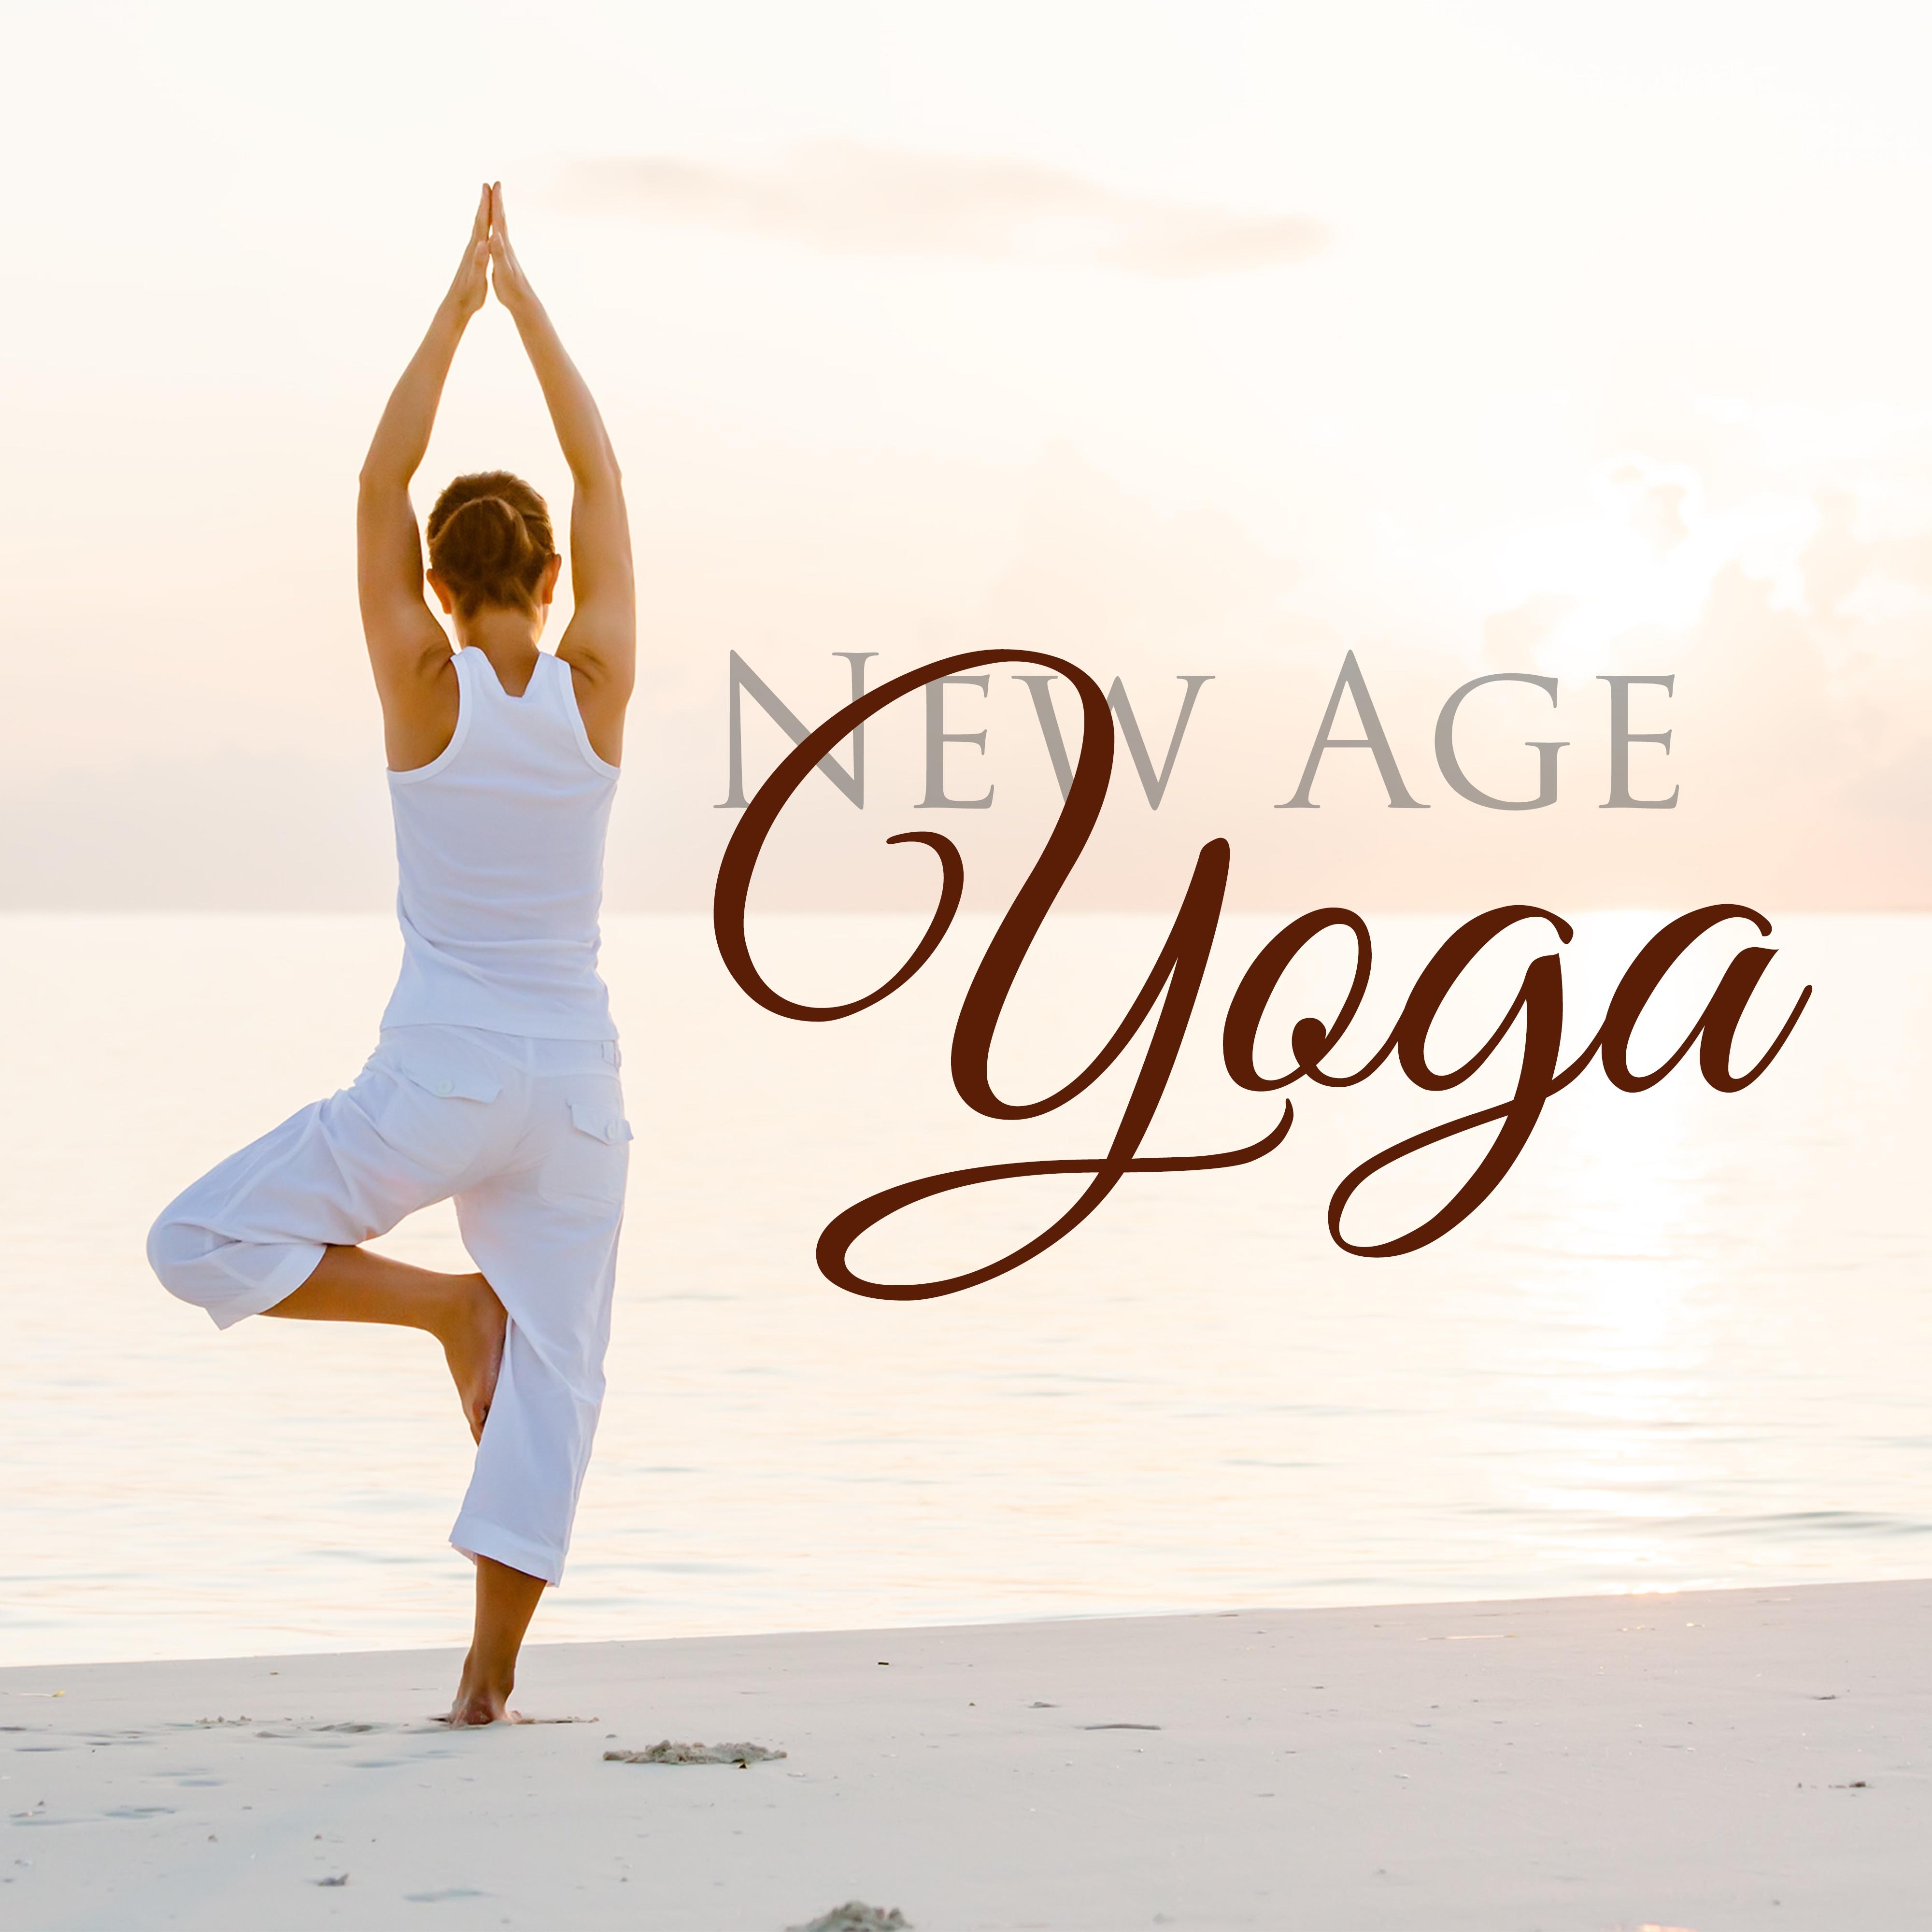 New Age Yoga - Soothing and Calming Music for Yoga Classes